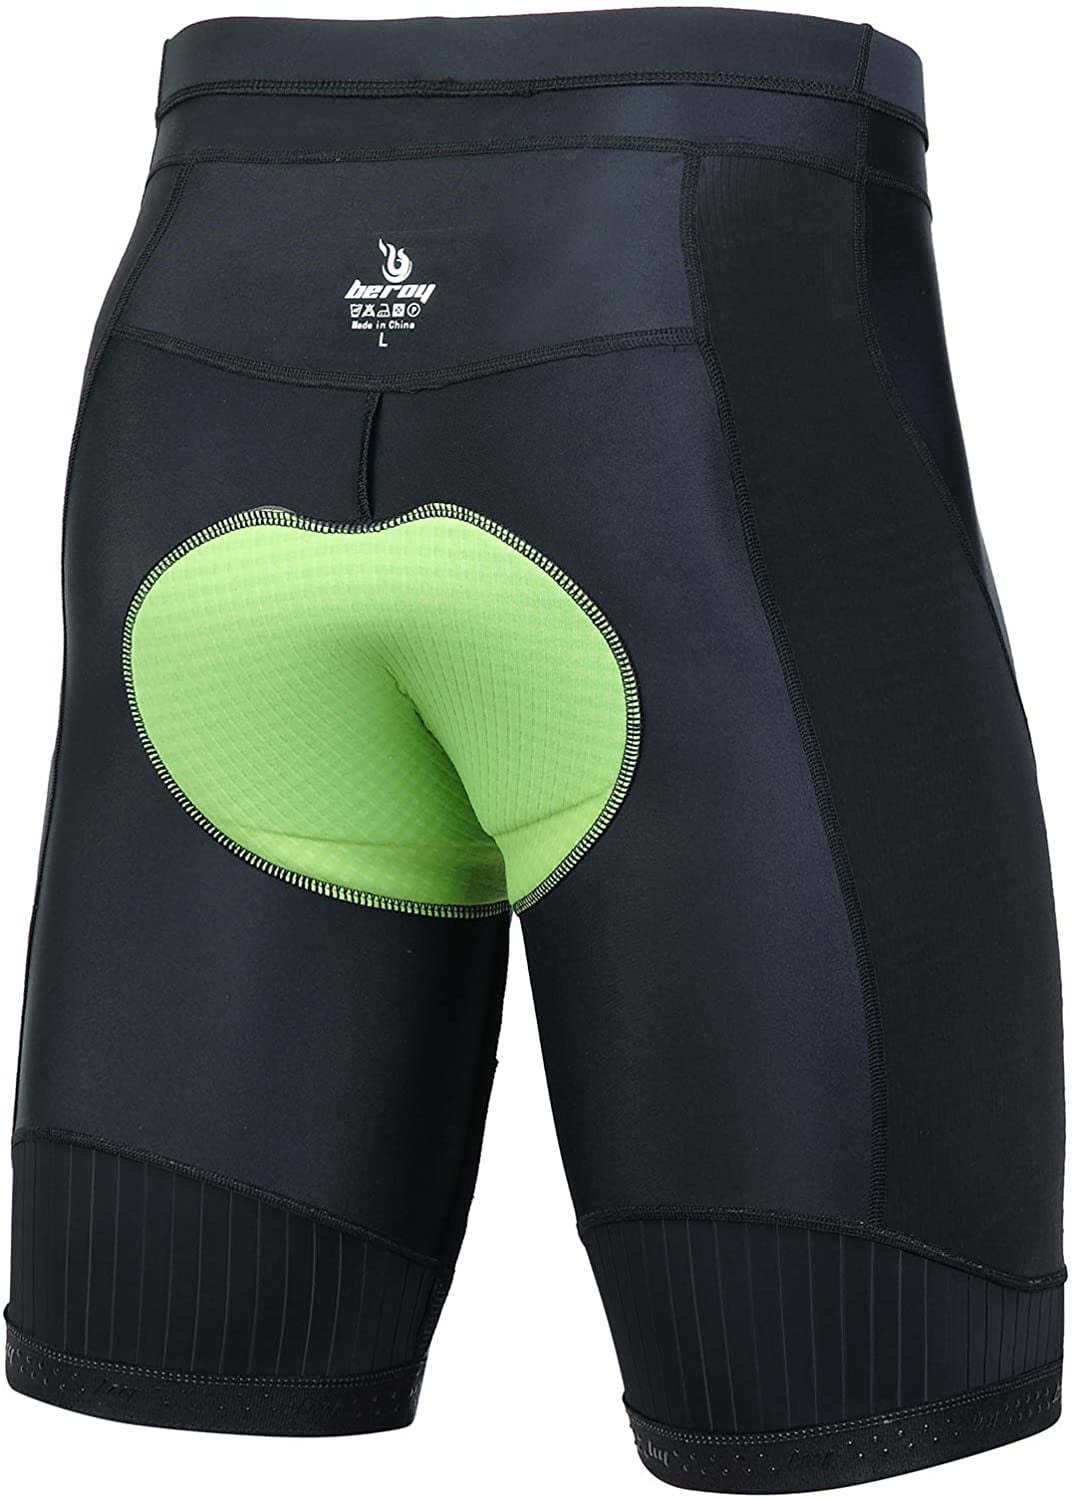 3D Padded Bike Shorts Sports & Outdoors beroy Men's Comfortable Bicycle Cycling Pants 